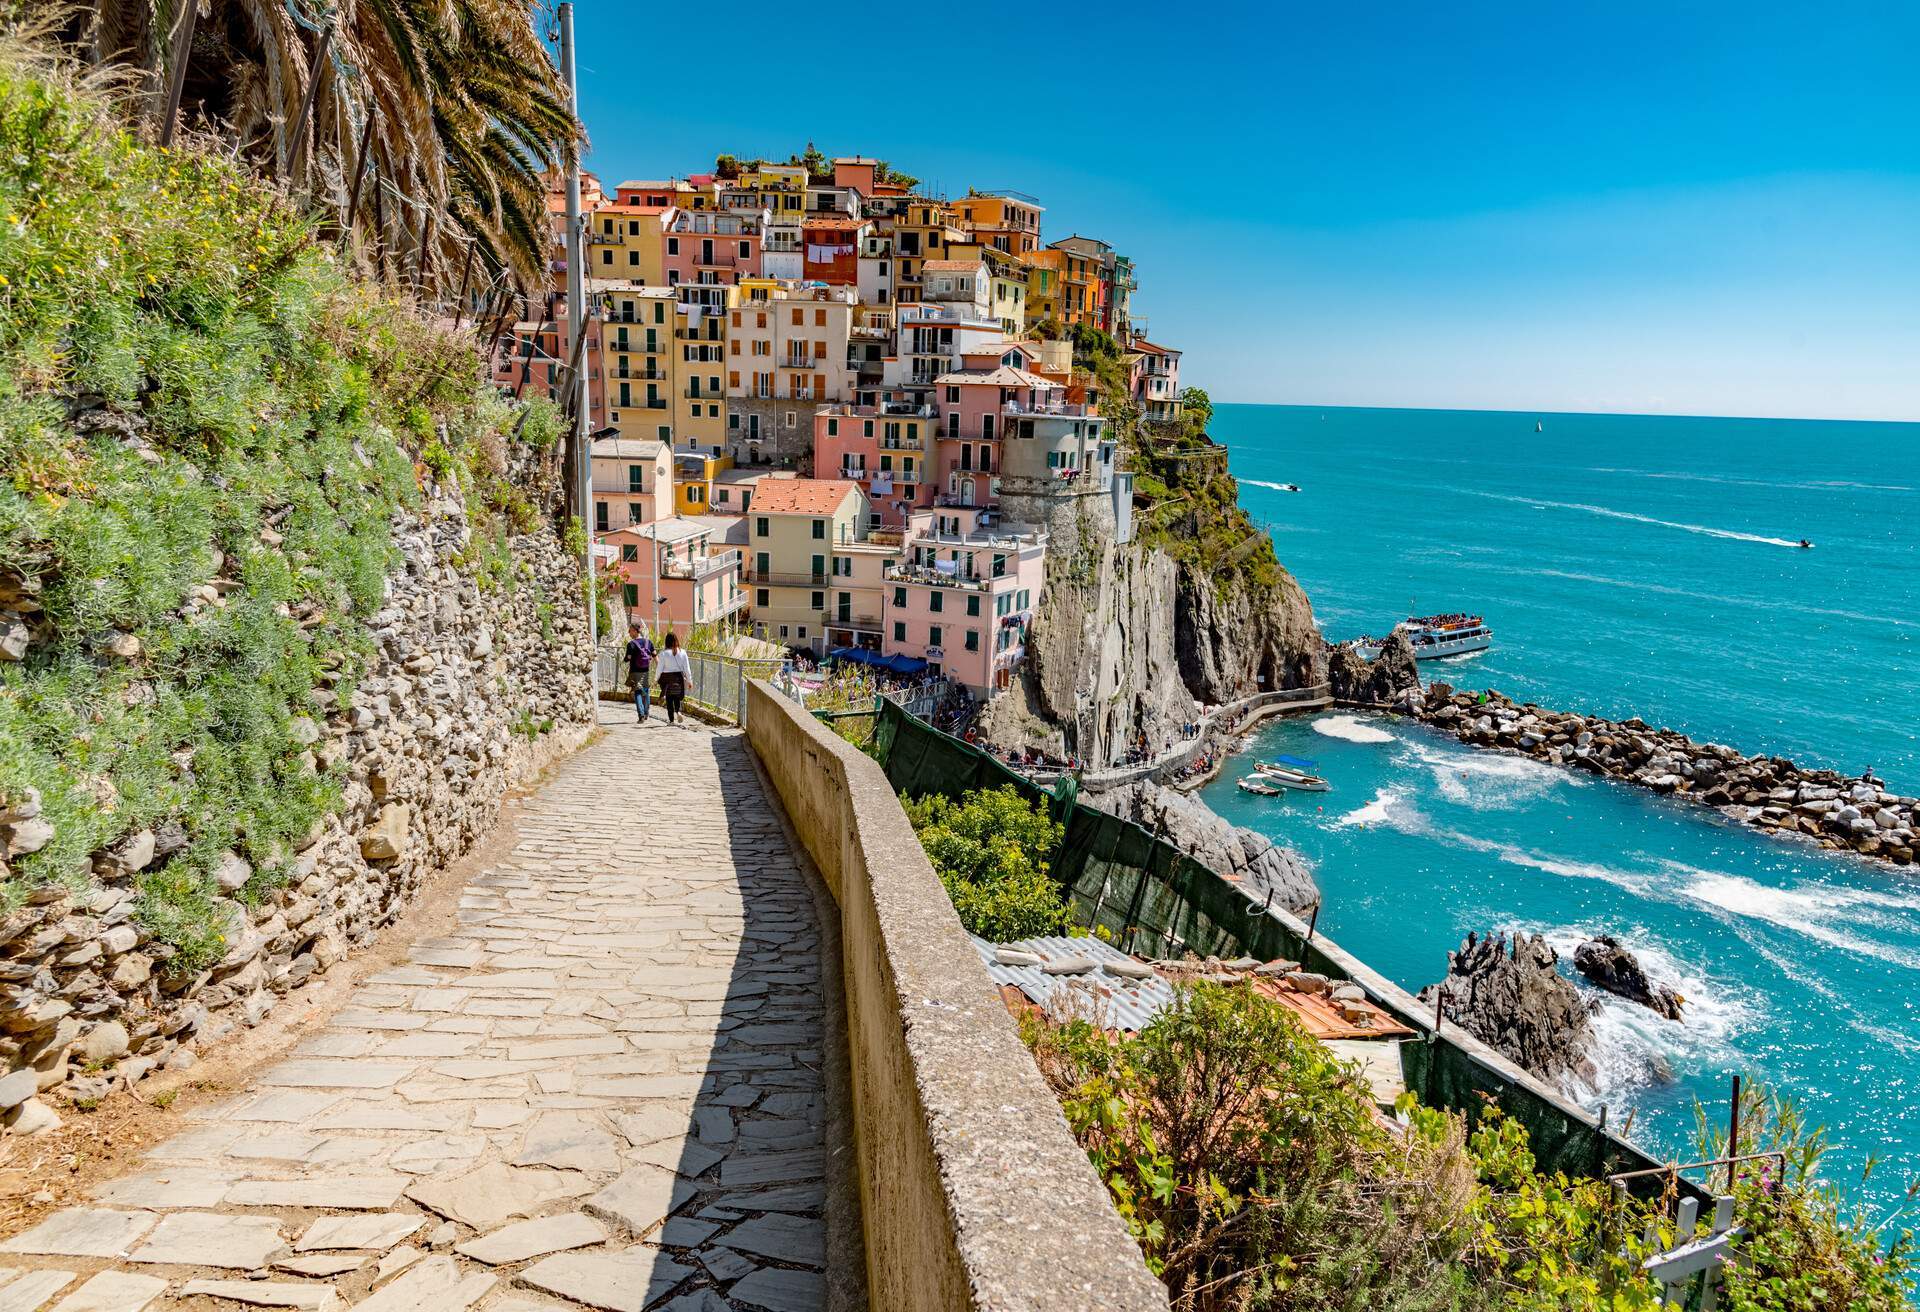 A paved downhill road by the sea overlooking the colourful traditional hillside houses.